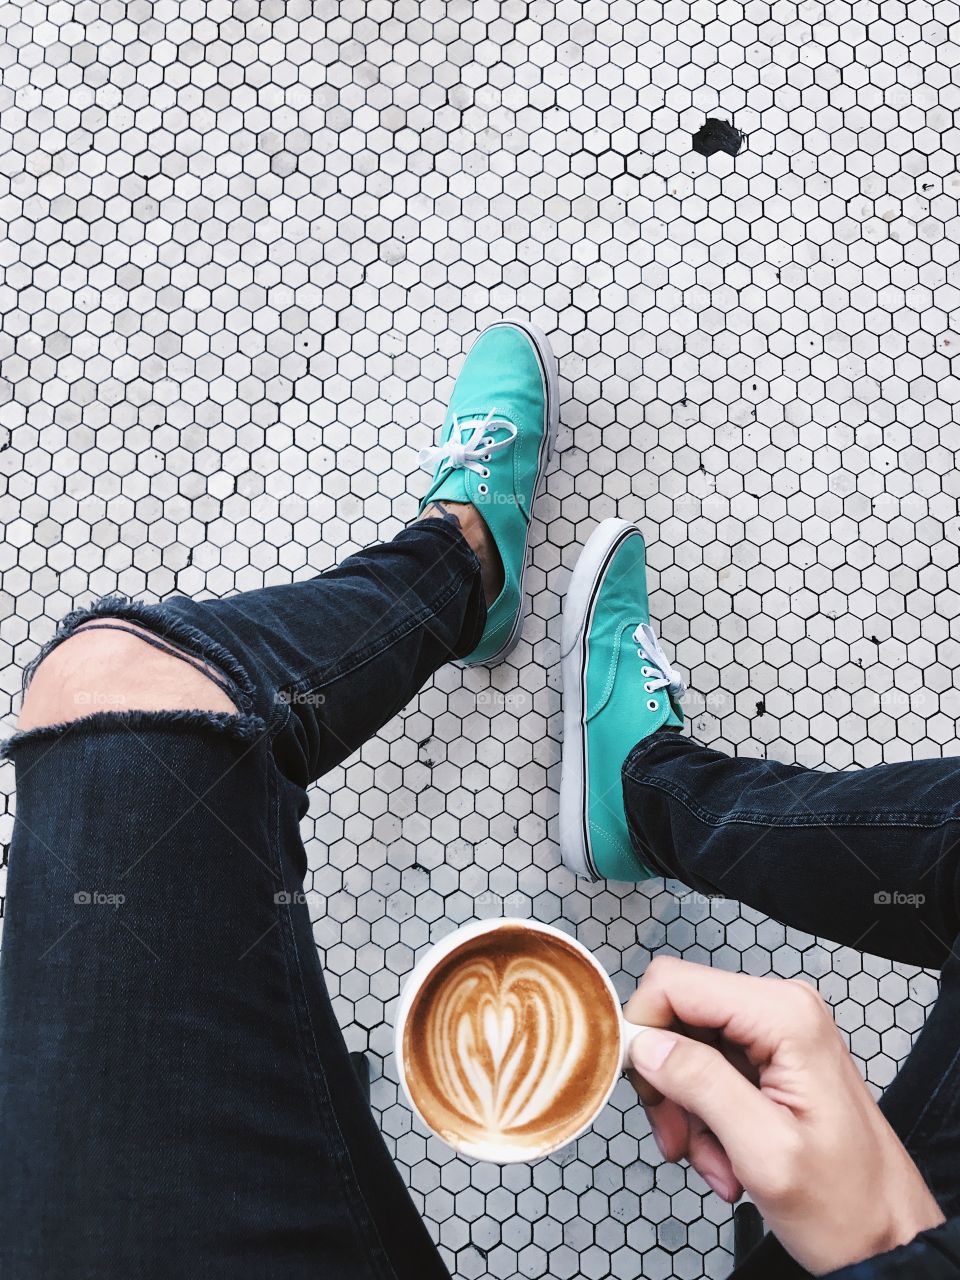 Coffee and feet on a cool tiled floor. 